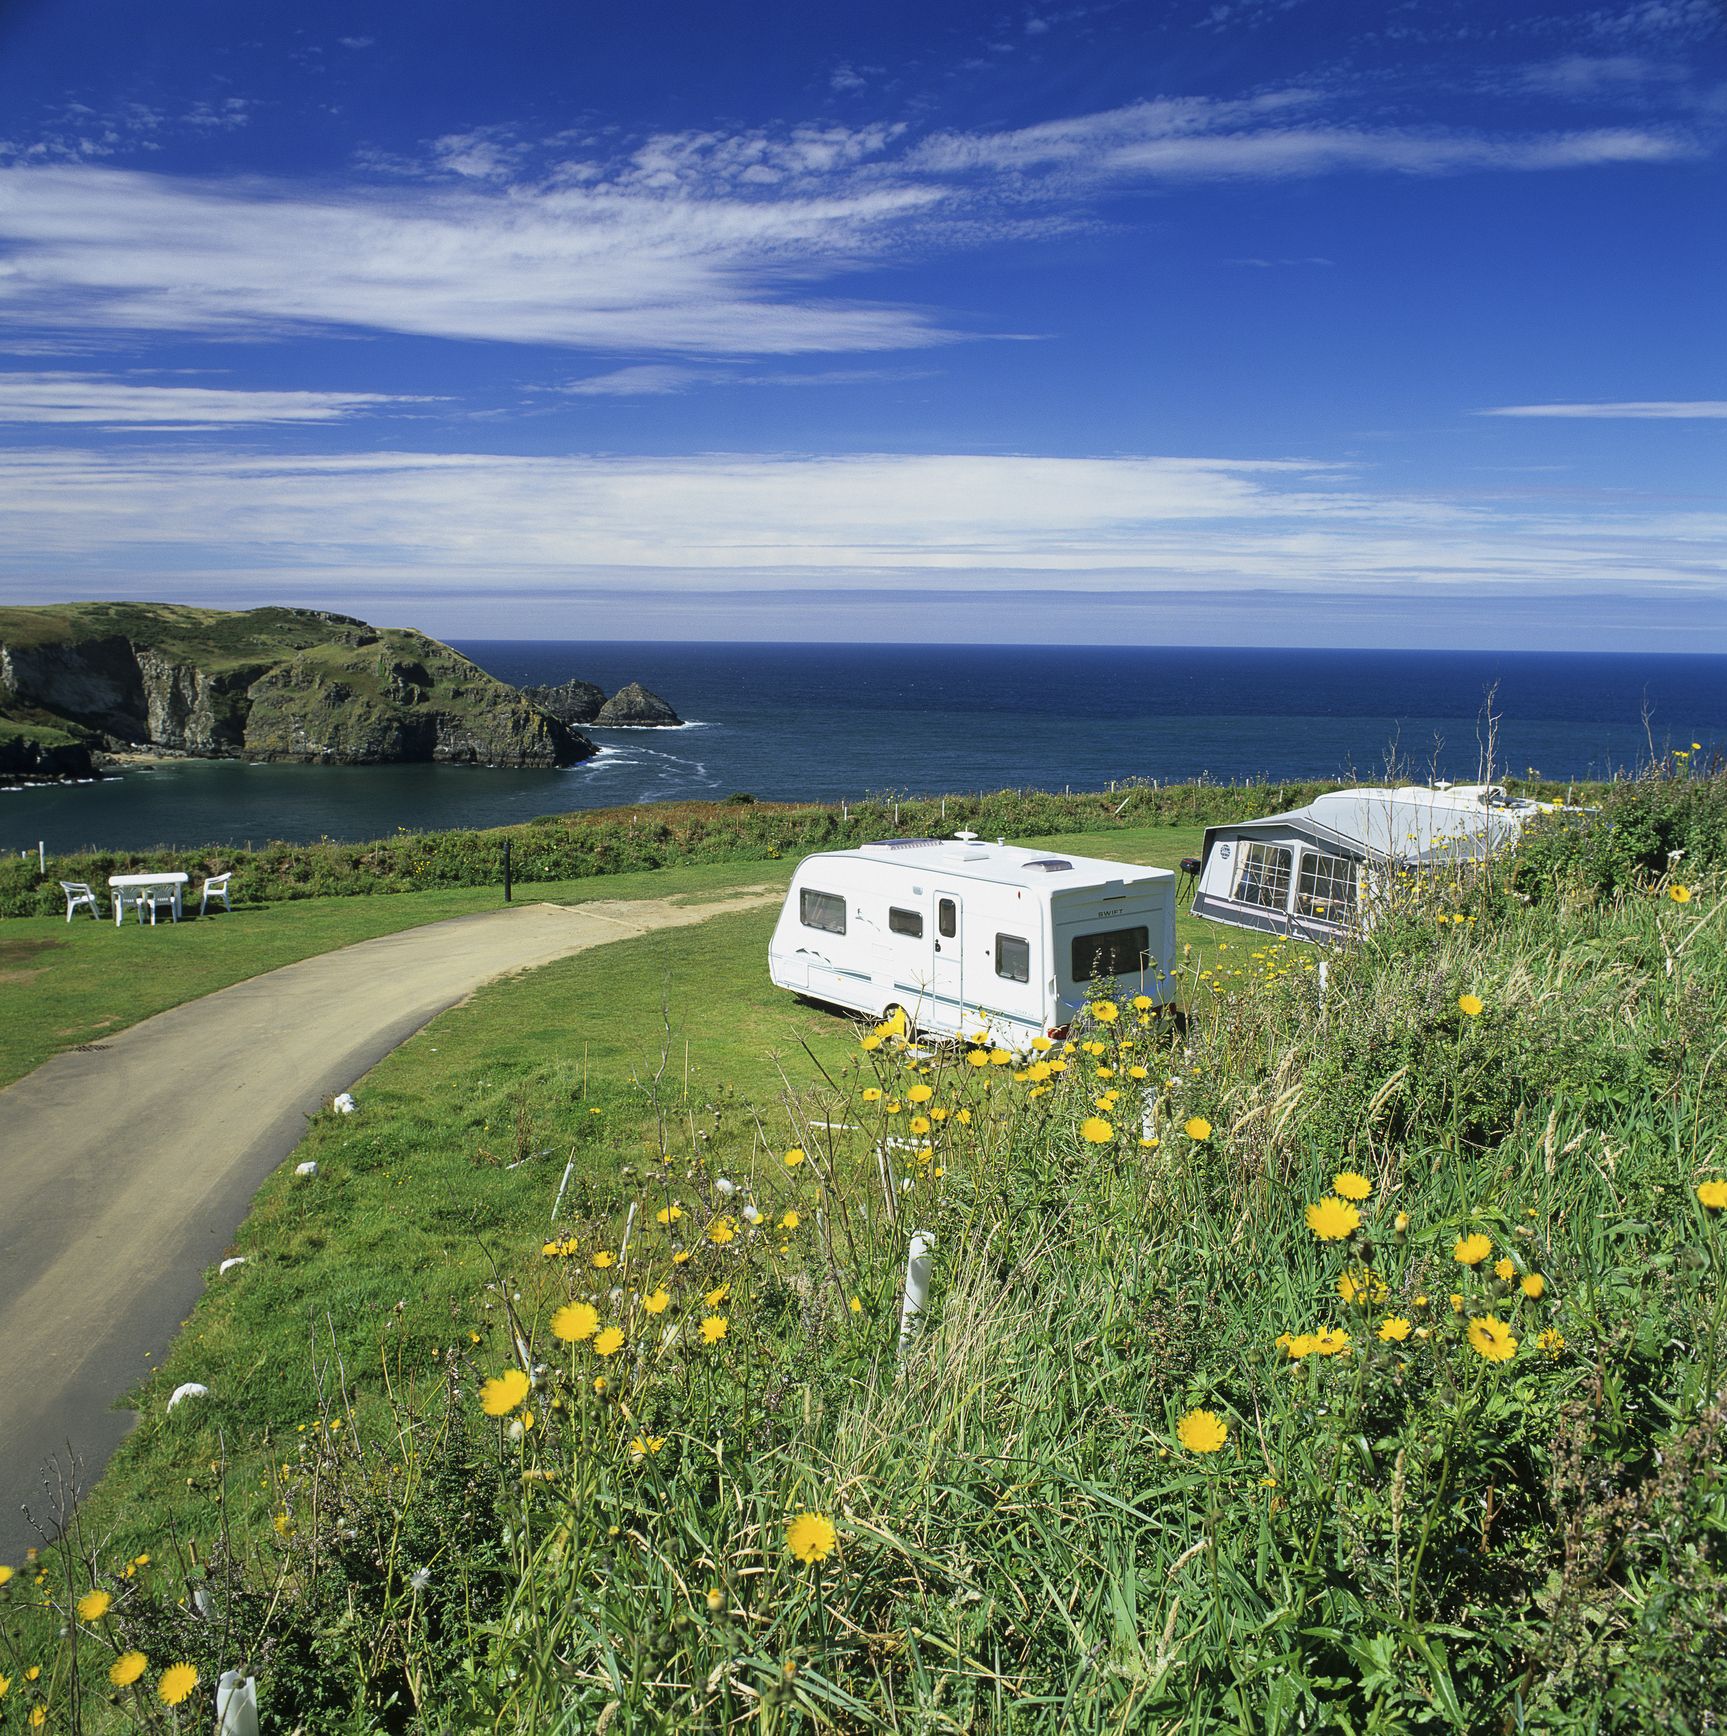 Caravans are the first choice for UK staycation accommodation this summer